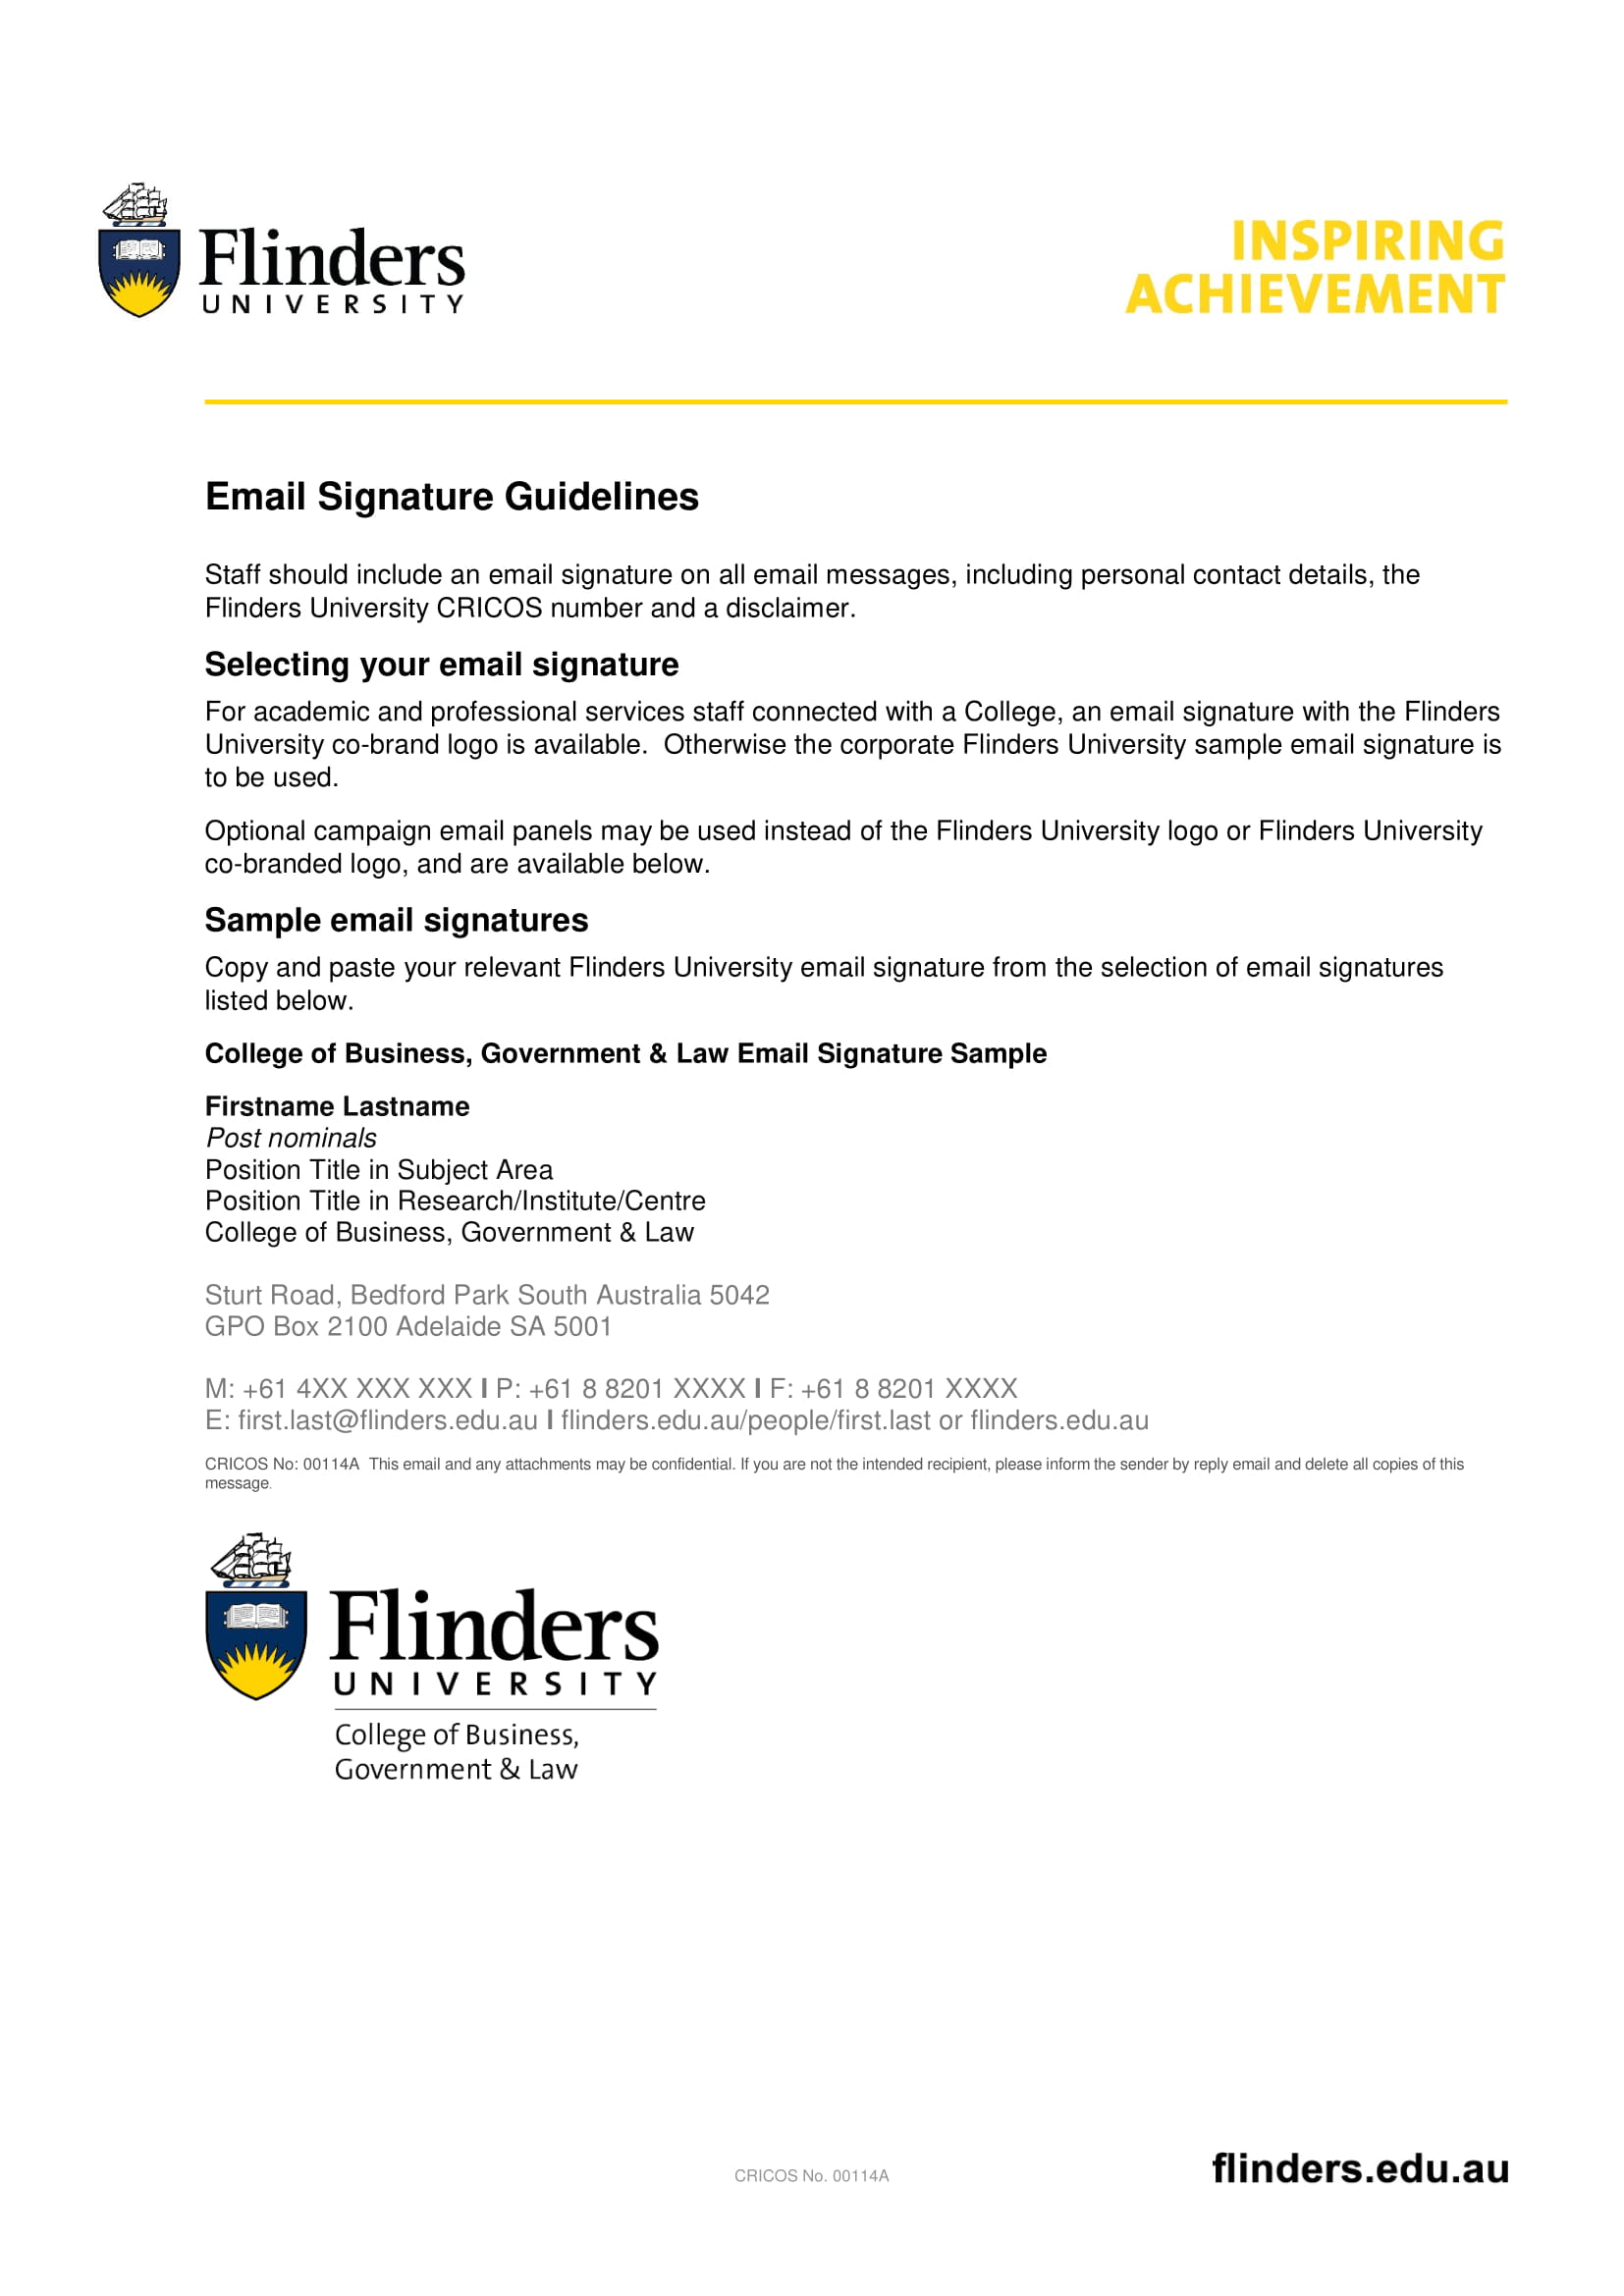 email signature guidelines policies and example 1